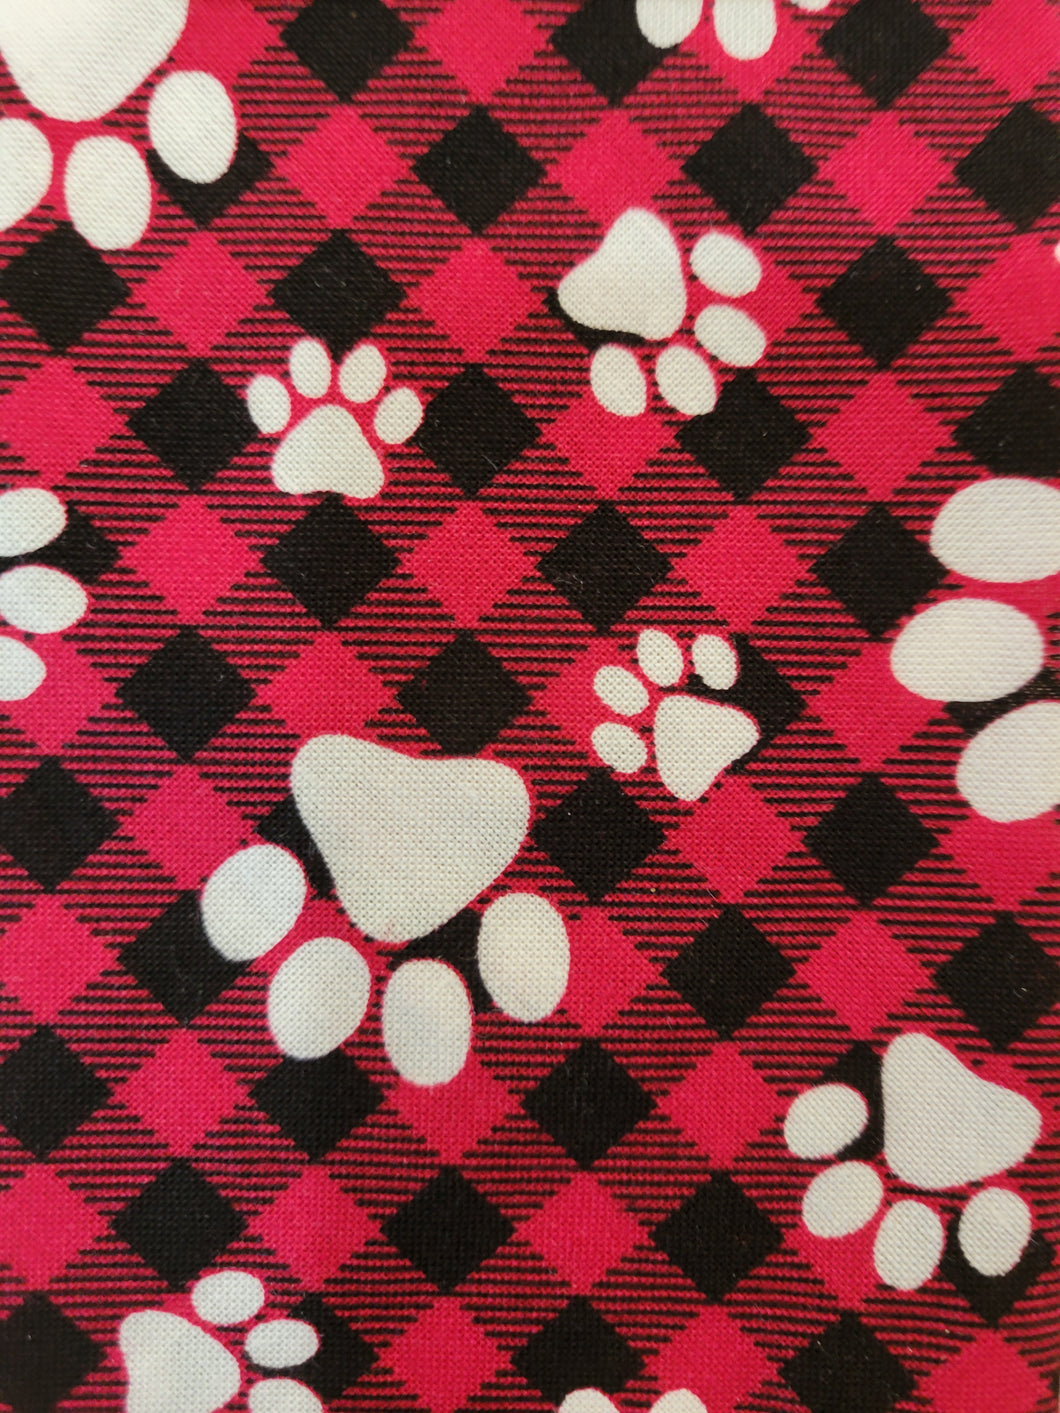 Red and Black Check with Paws Bandana (SMALL)